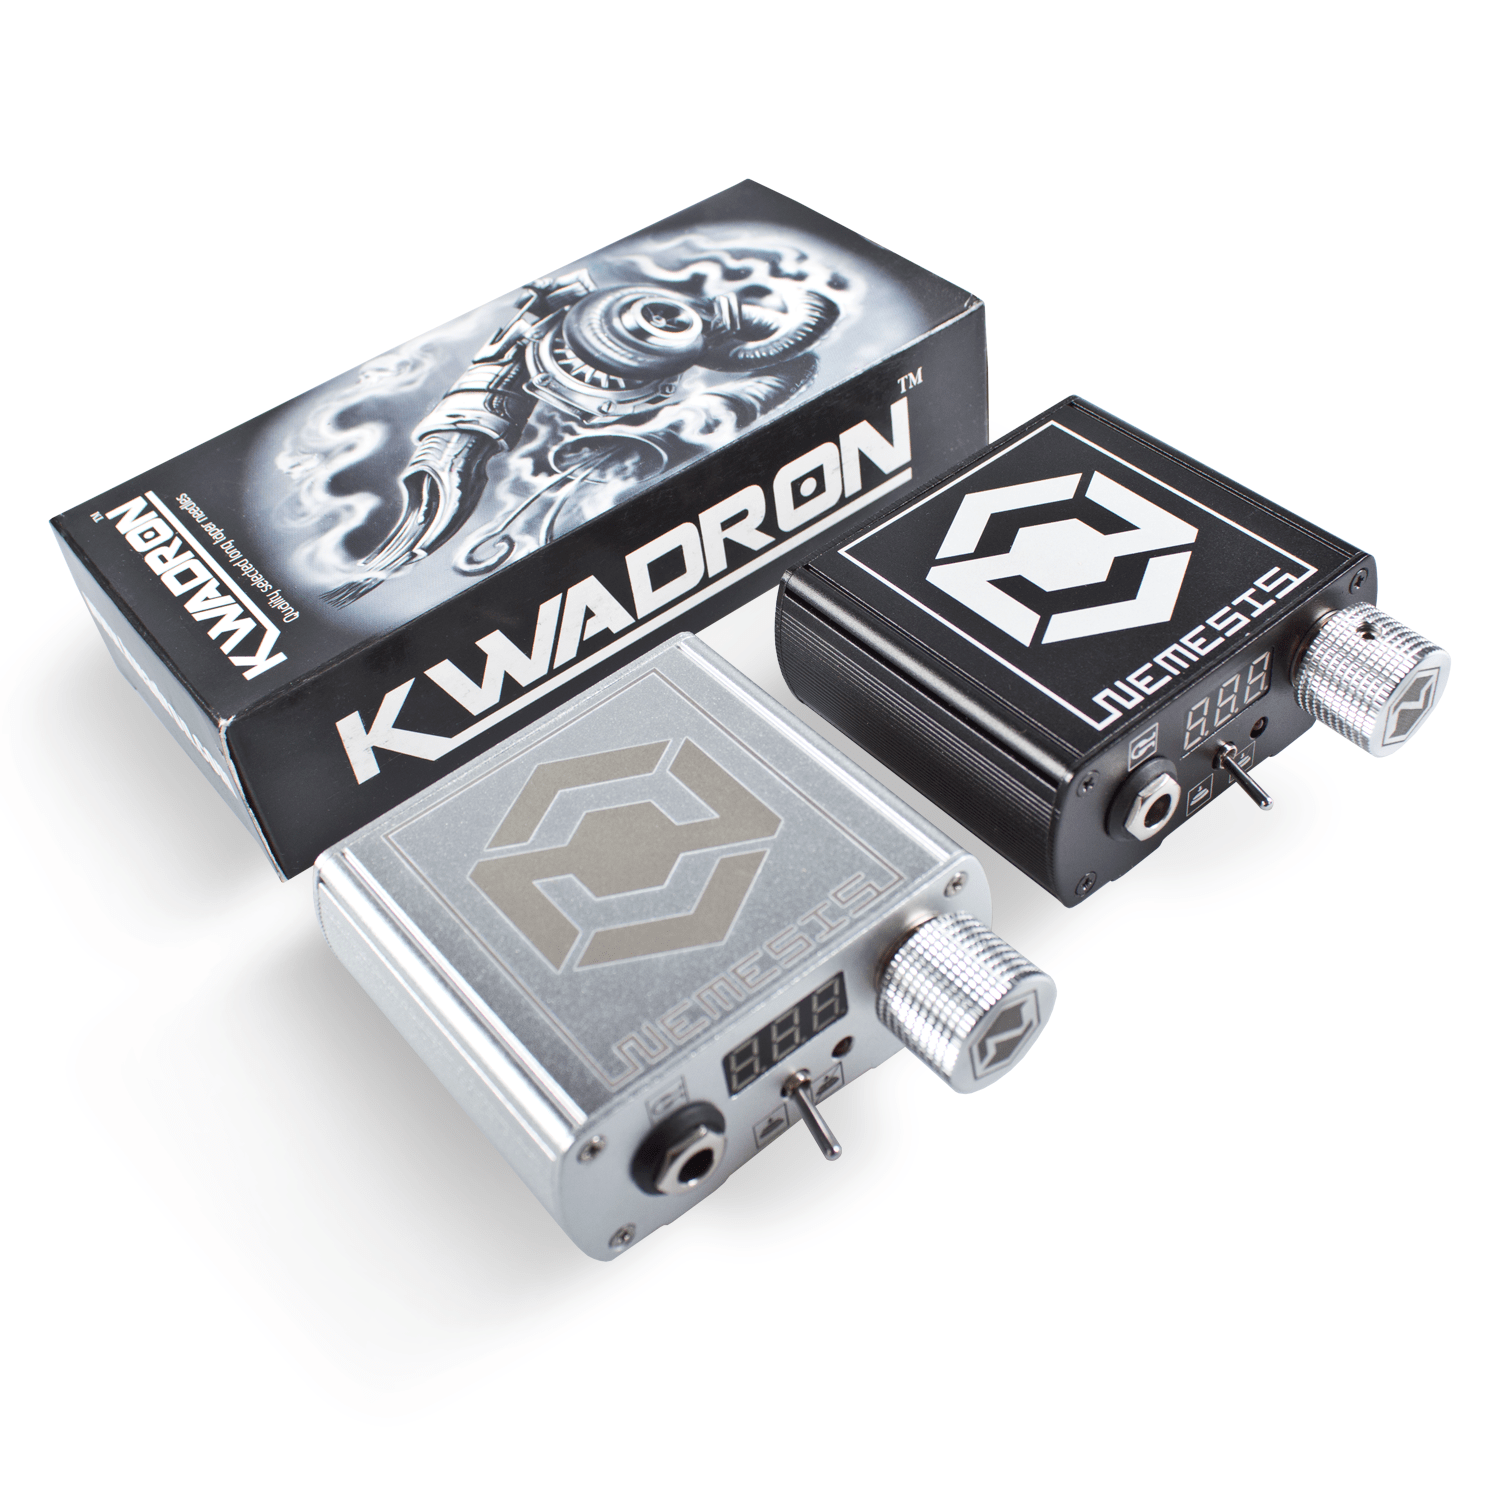 Nemesis Professional Tattoo Power Supply in Silver by Kwadron Black and Silver 1